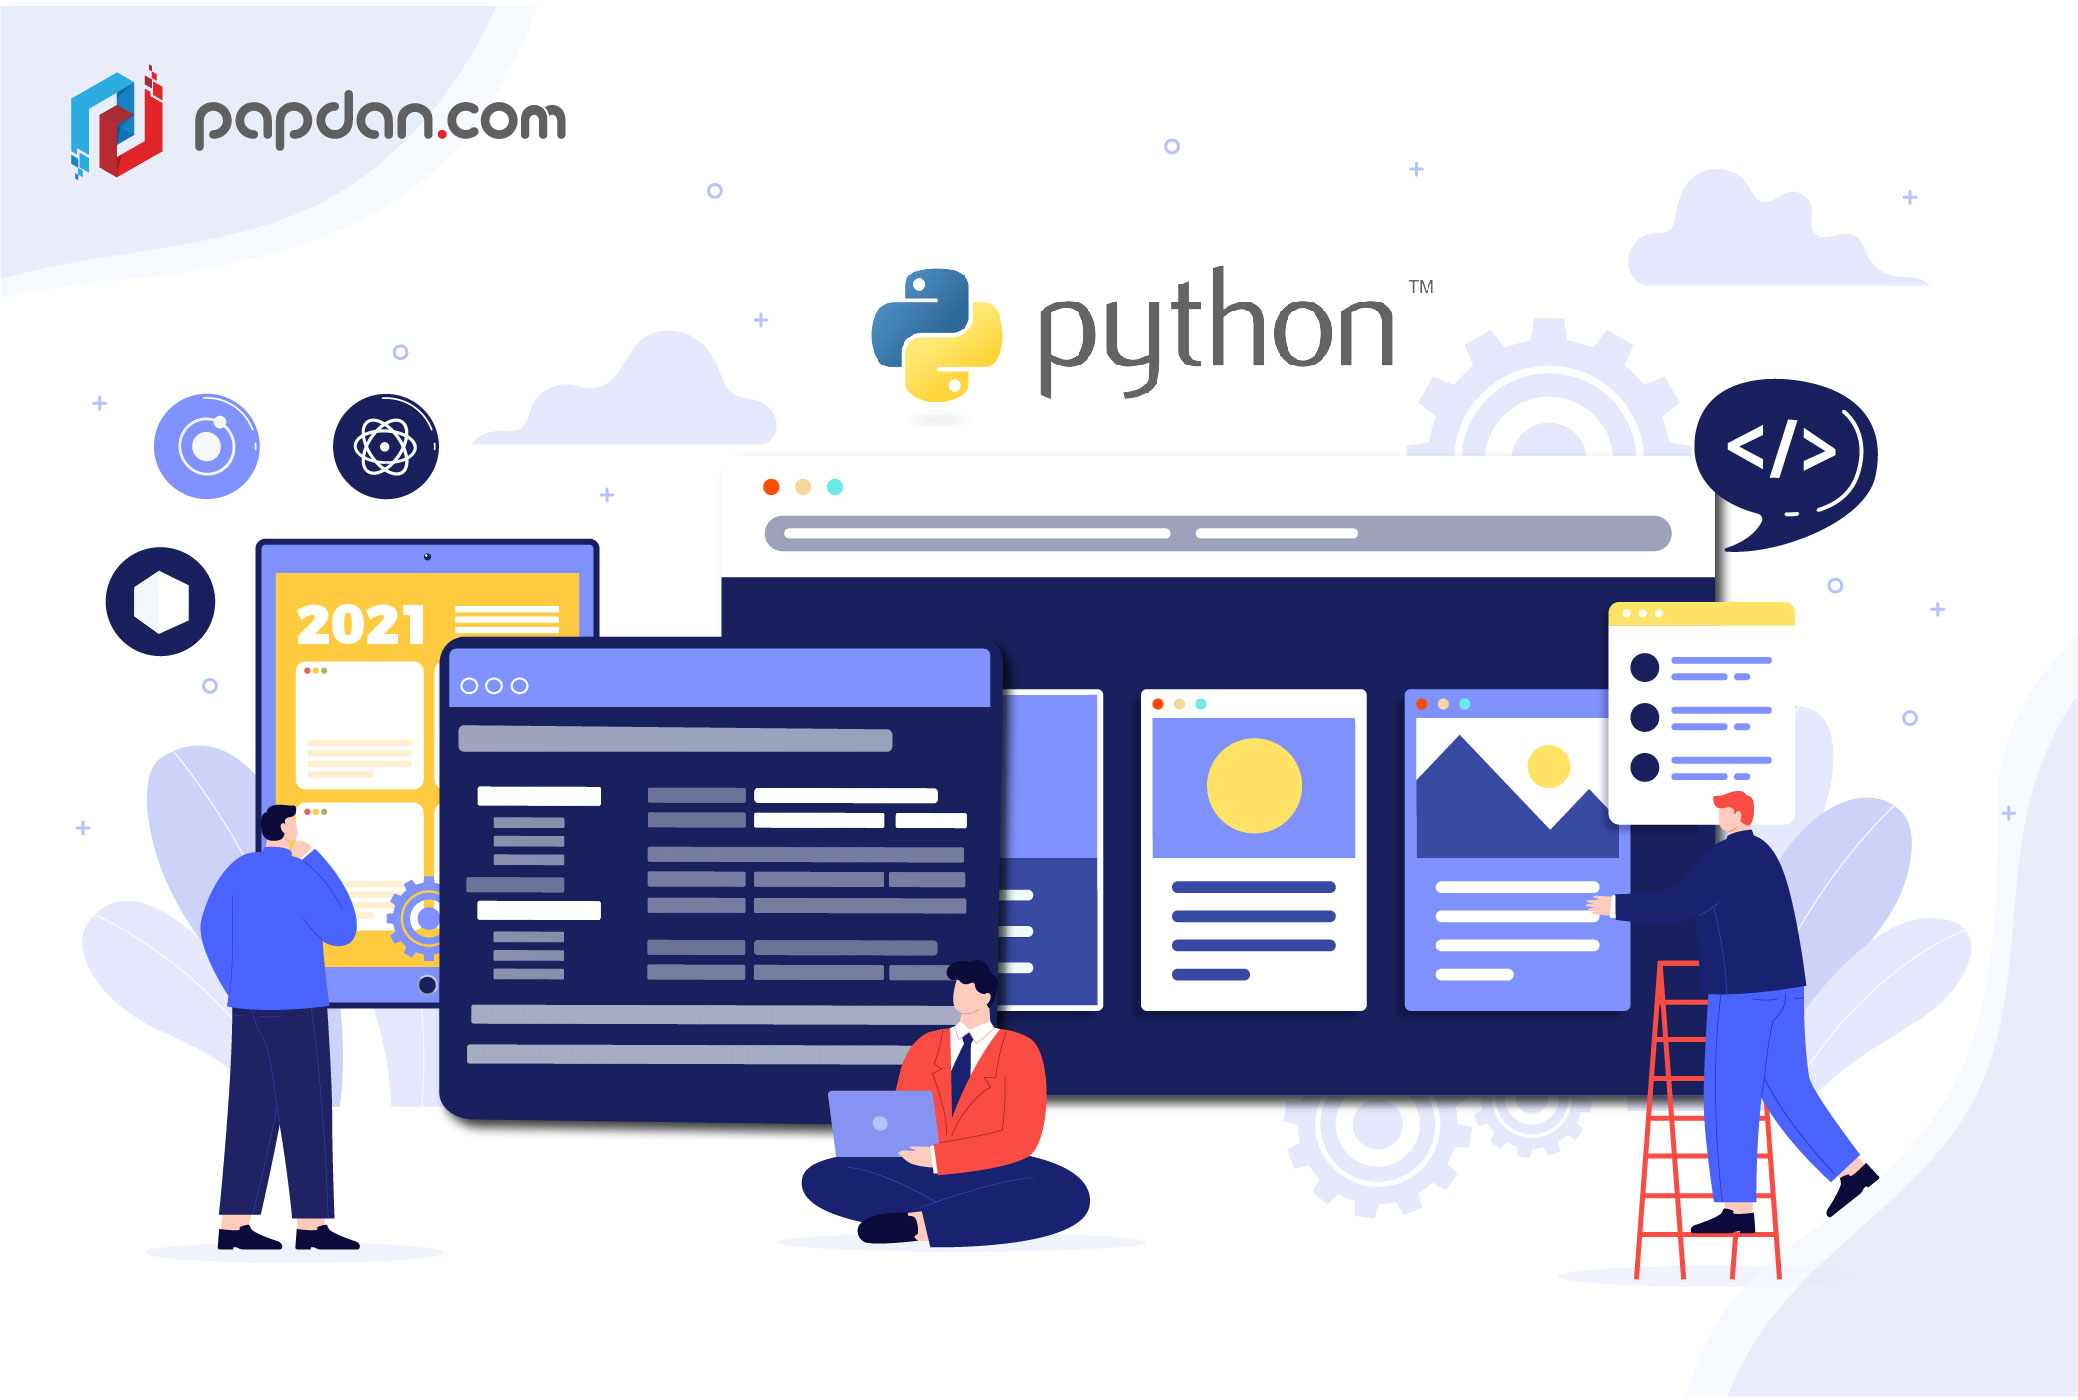 Here are 5 Best Python Frameworks in 2021 for Web Development!